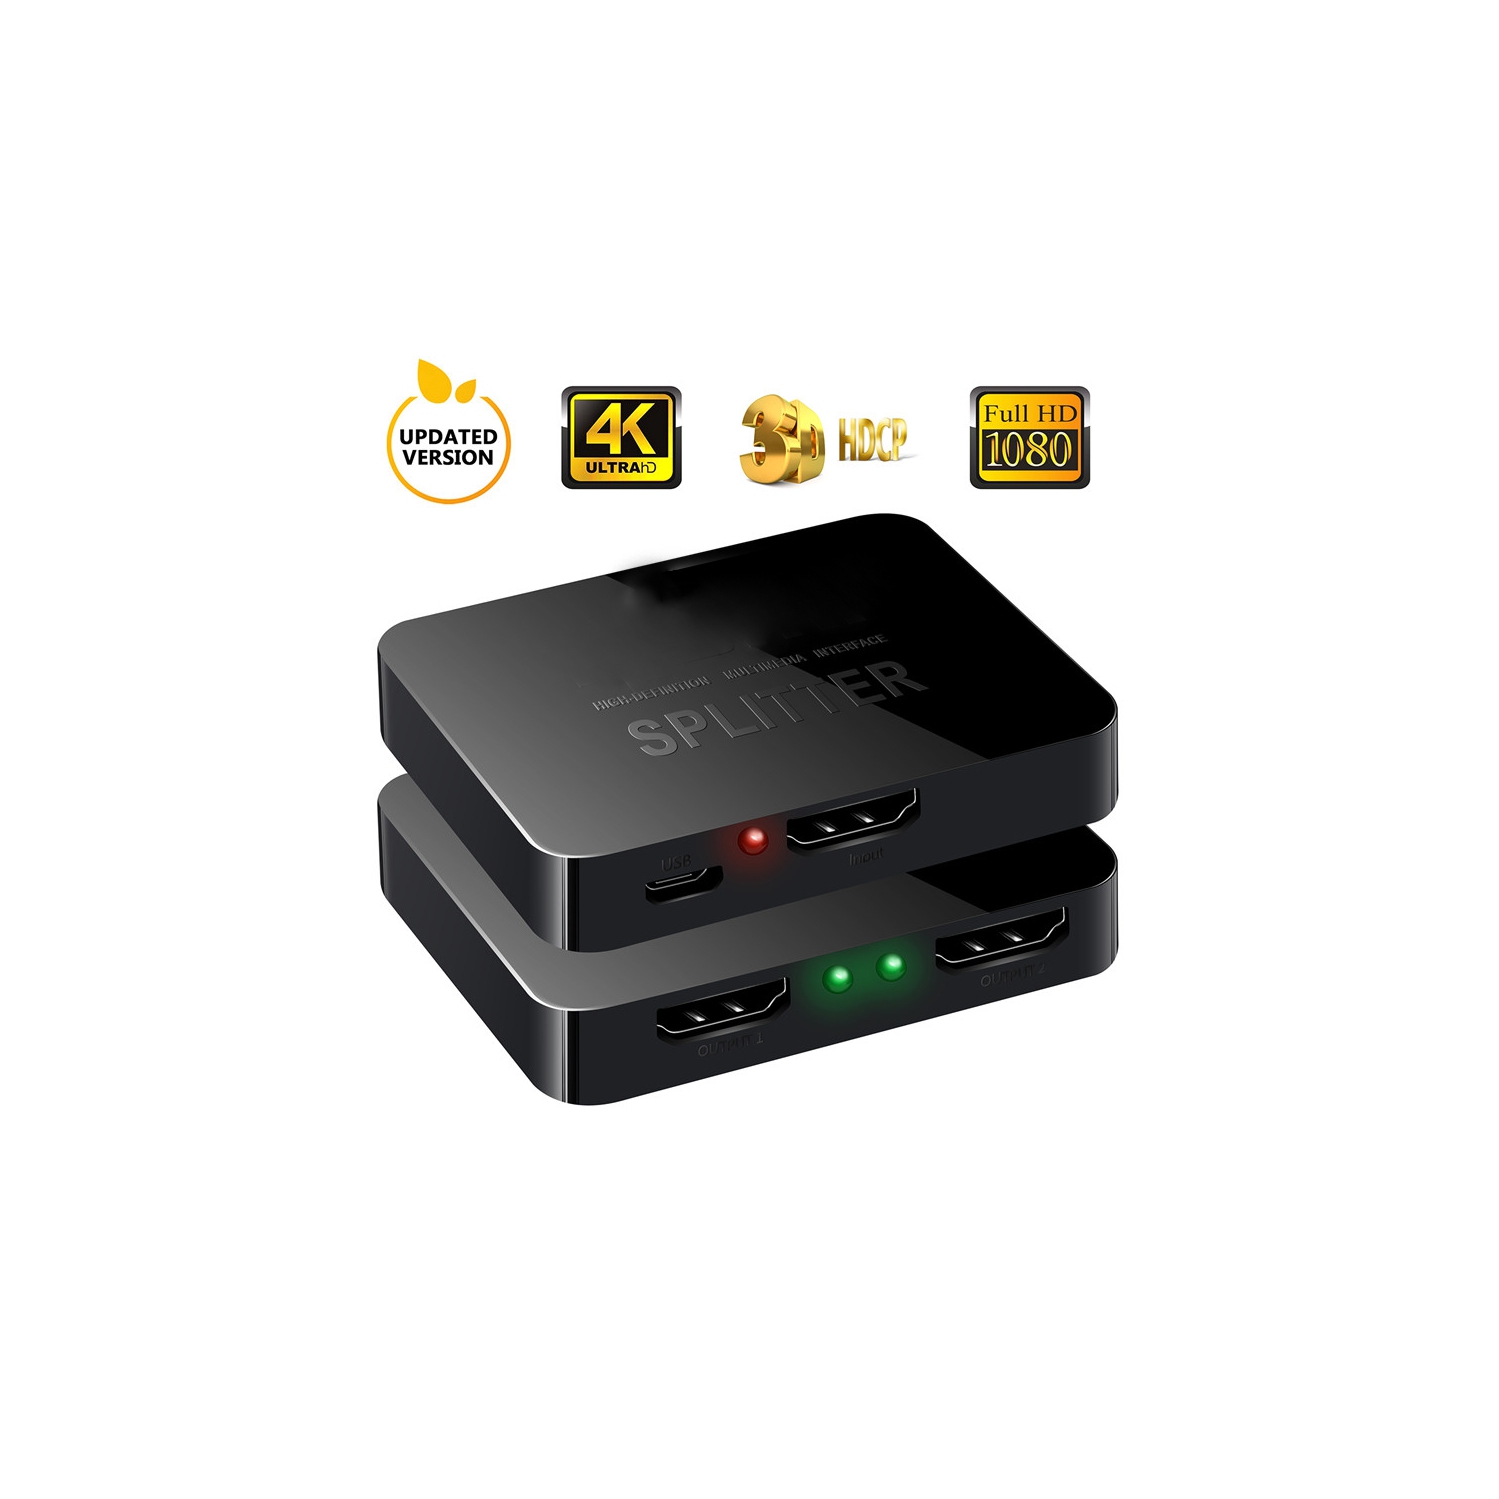 HDMI Splitter 1 in 2 Out 2 Way Port Video Splitter Distributor 4K HDMI Splitter for 4K TV DVD PS5 and more-FREE SHIPPING